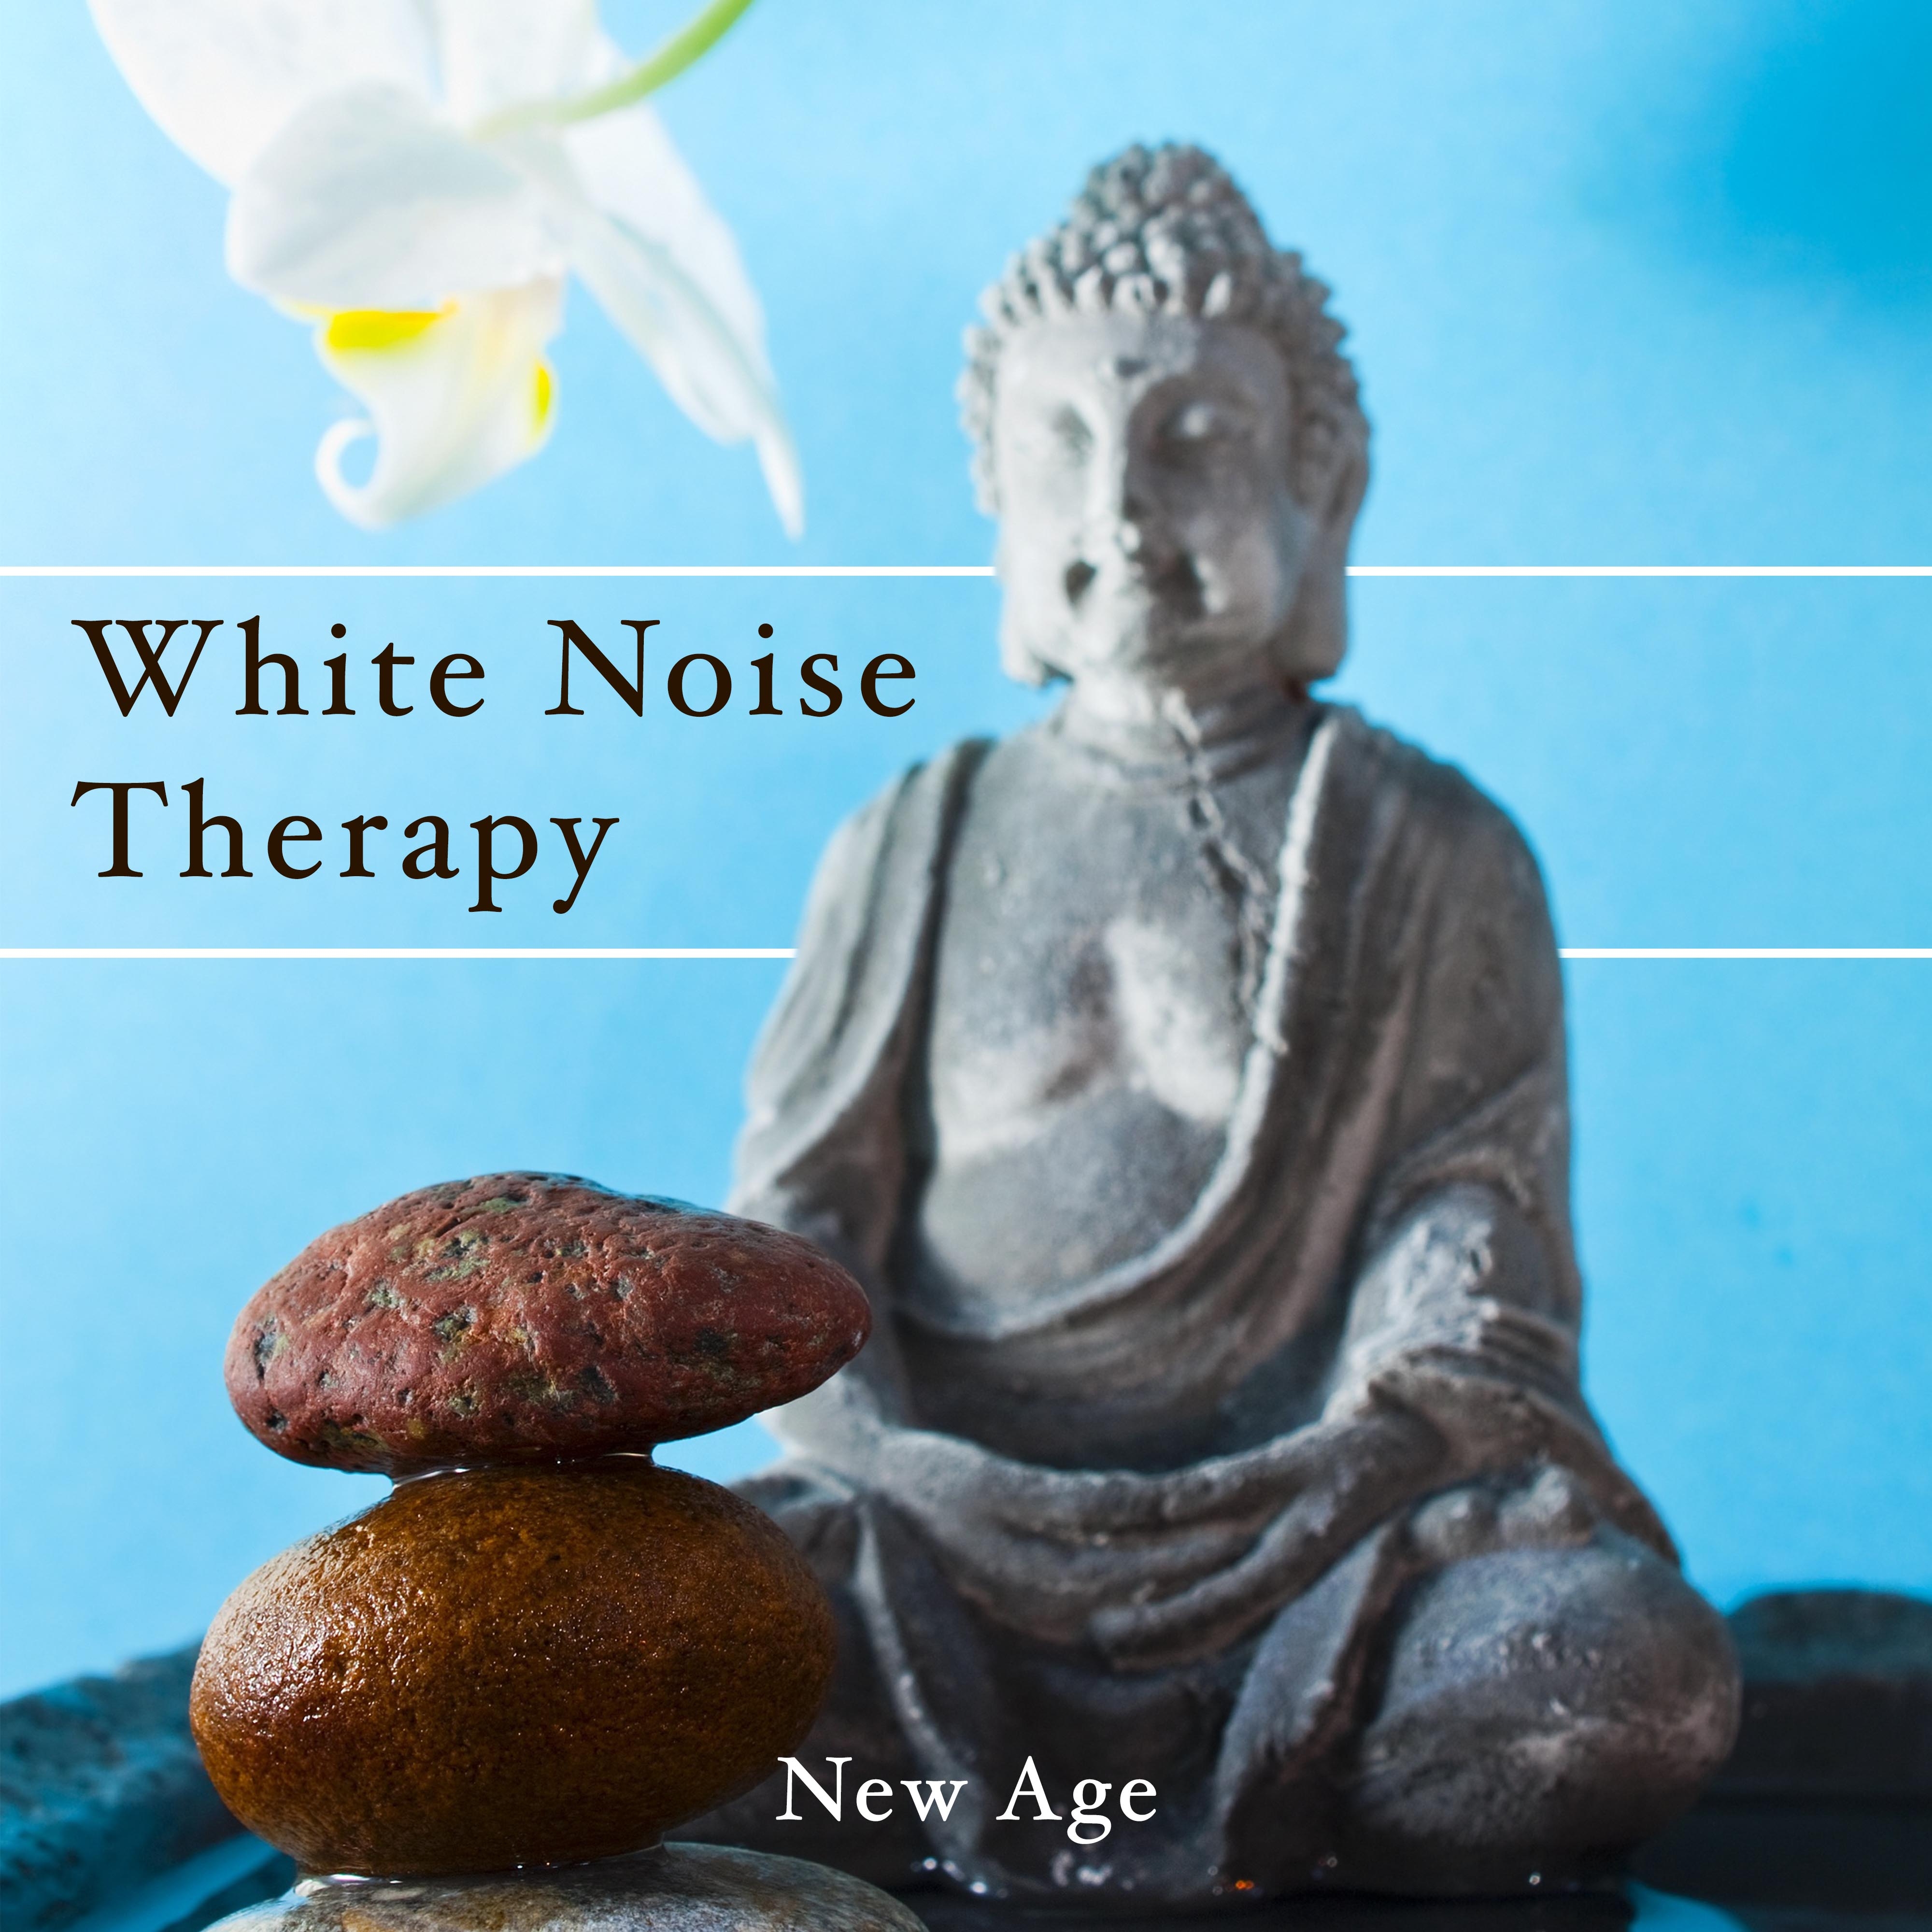 White Noise Therapy - Relaxation Meditation Music with Sounds of Nature